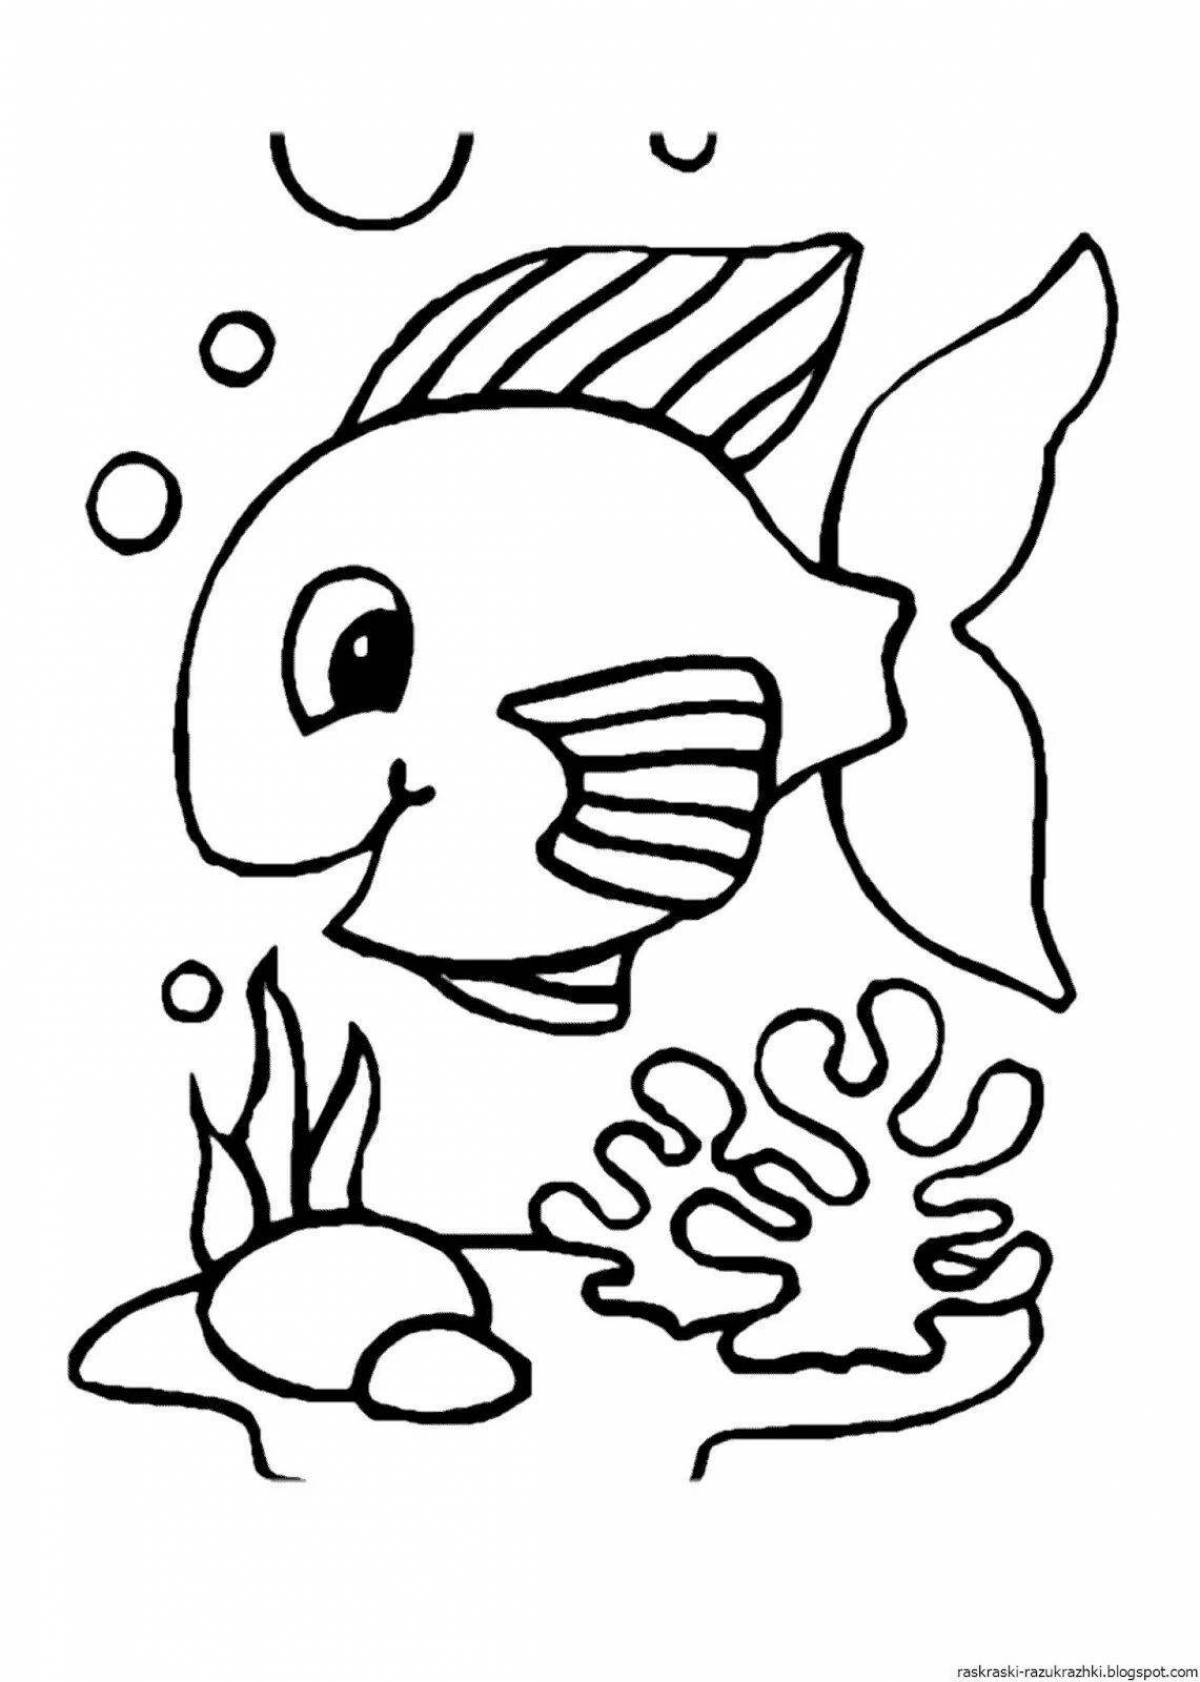 Impressive fish coloring page for kids